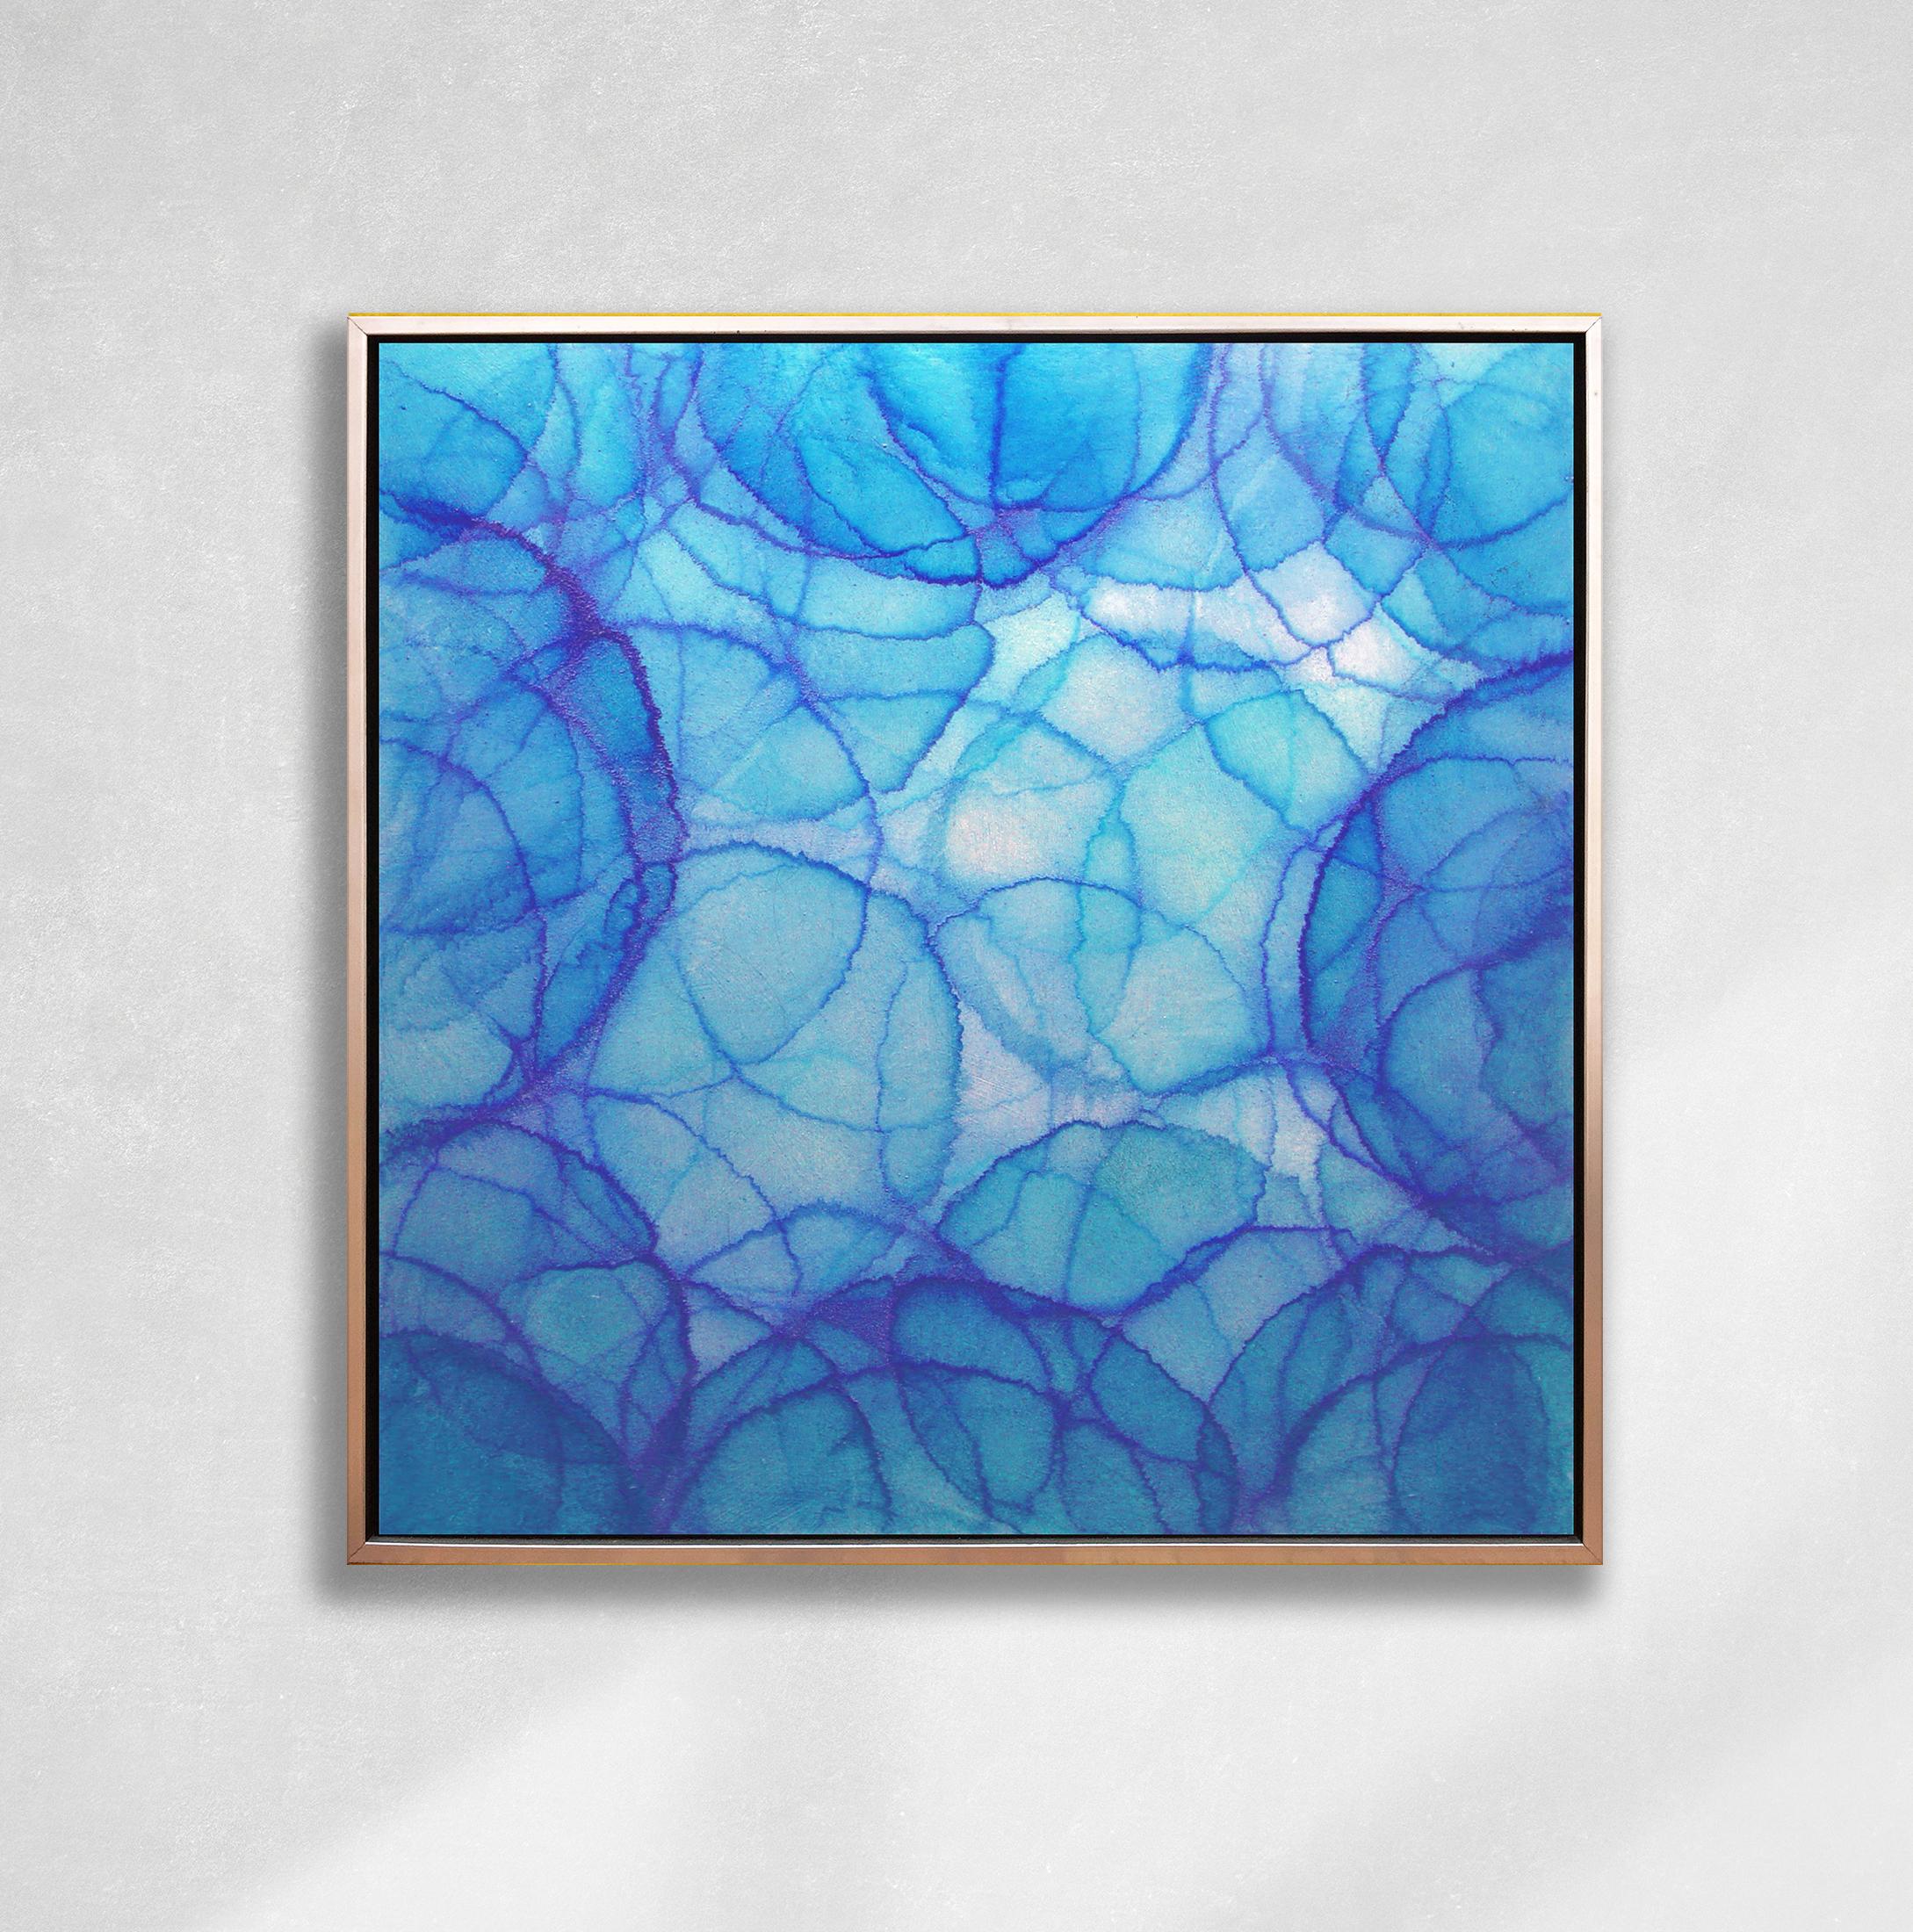 This abstract painting by Roger Mudre features a cool blue and turquoise palette, and light circular shapes layered on top of one another throughout the composition. Made with acrylic paint over metal leaf on cradled panel, it transforms and